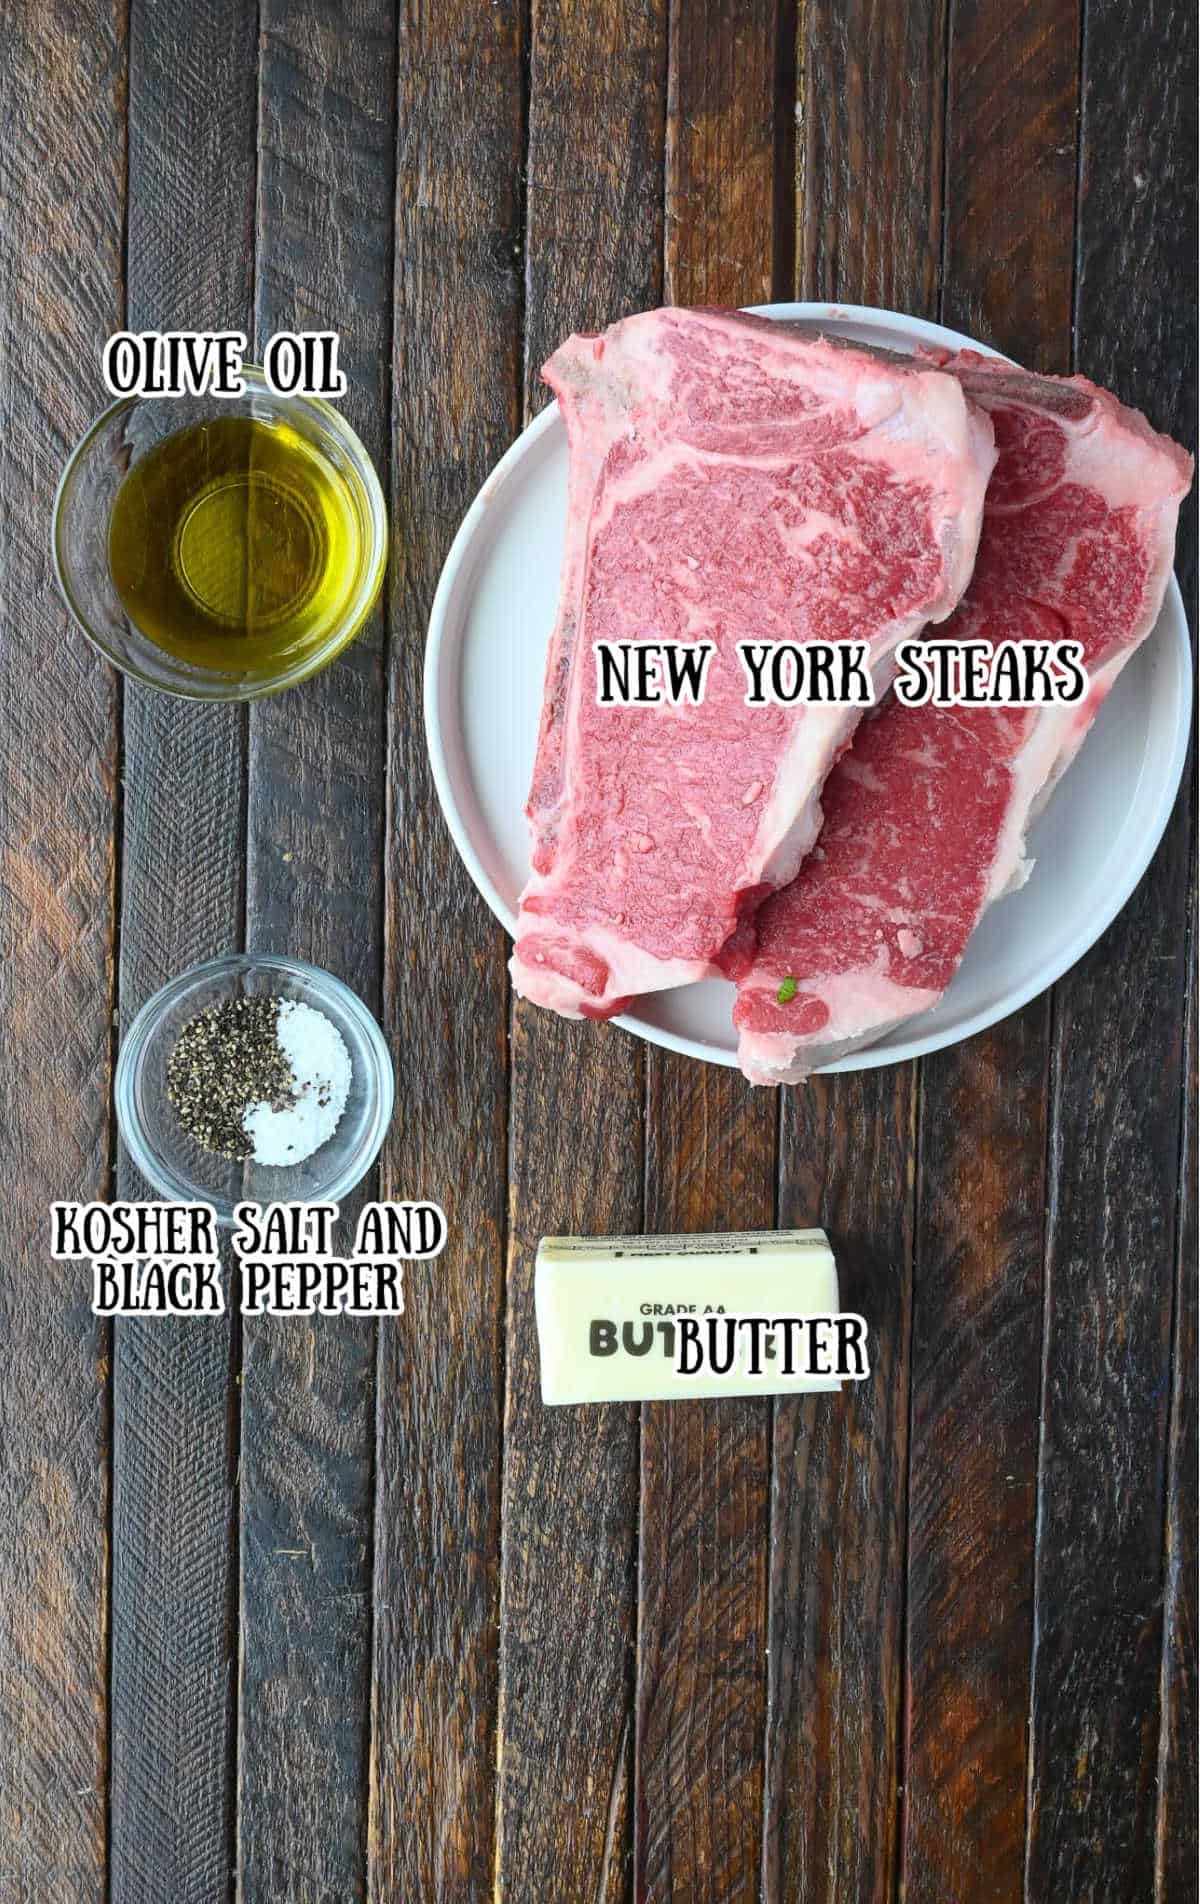 All the ingredients needed for this new york steak.